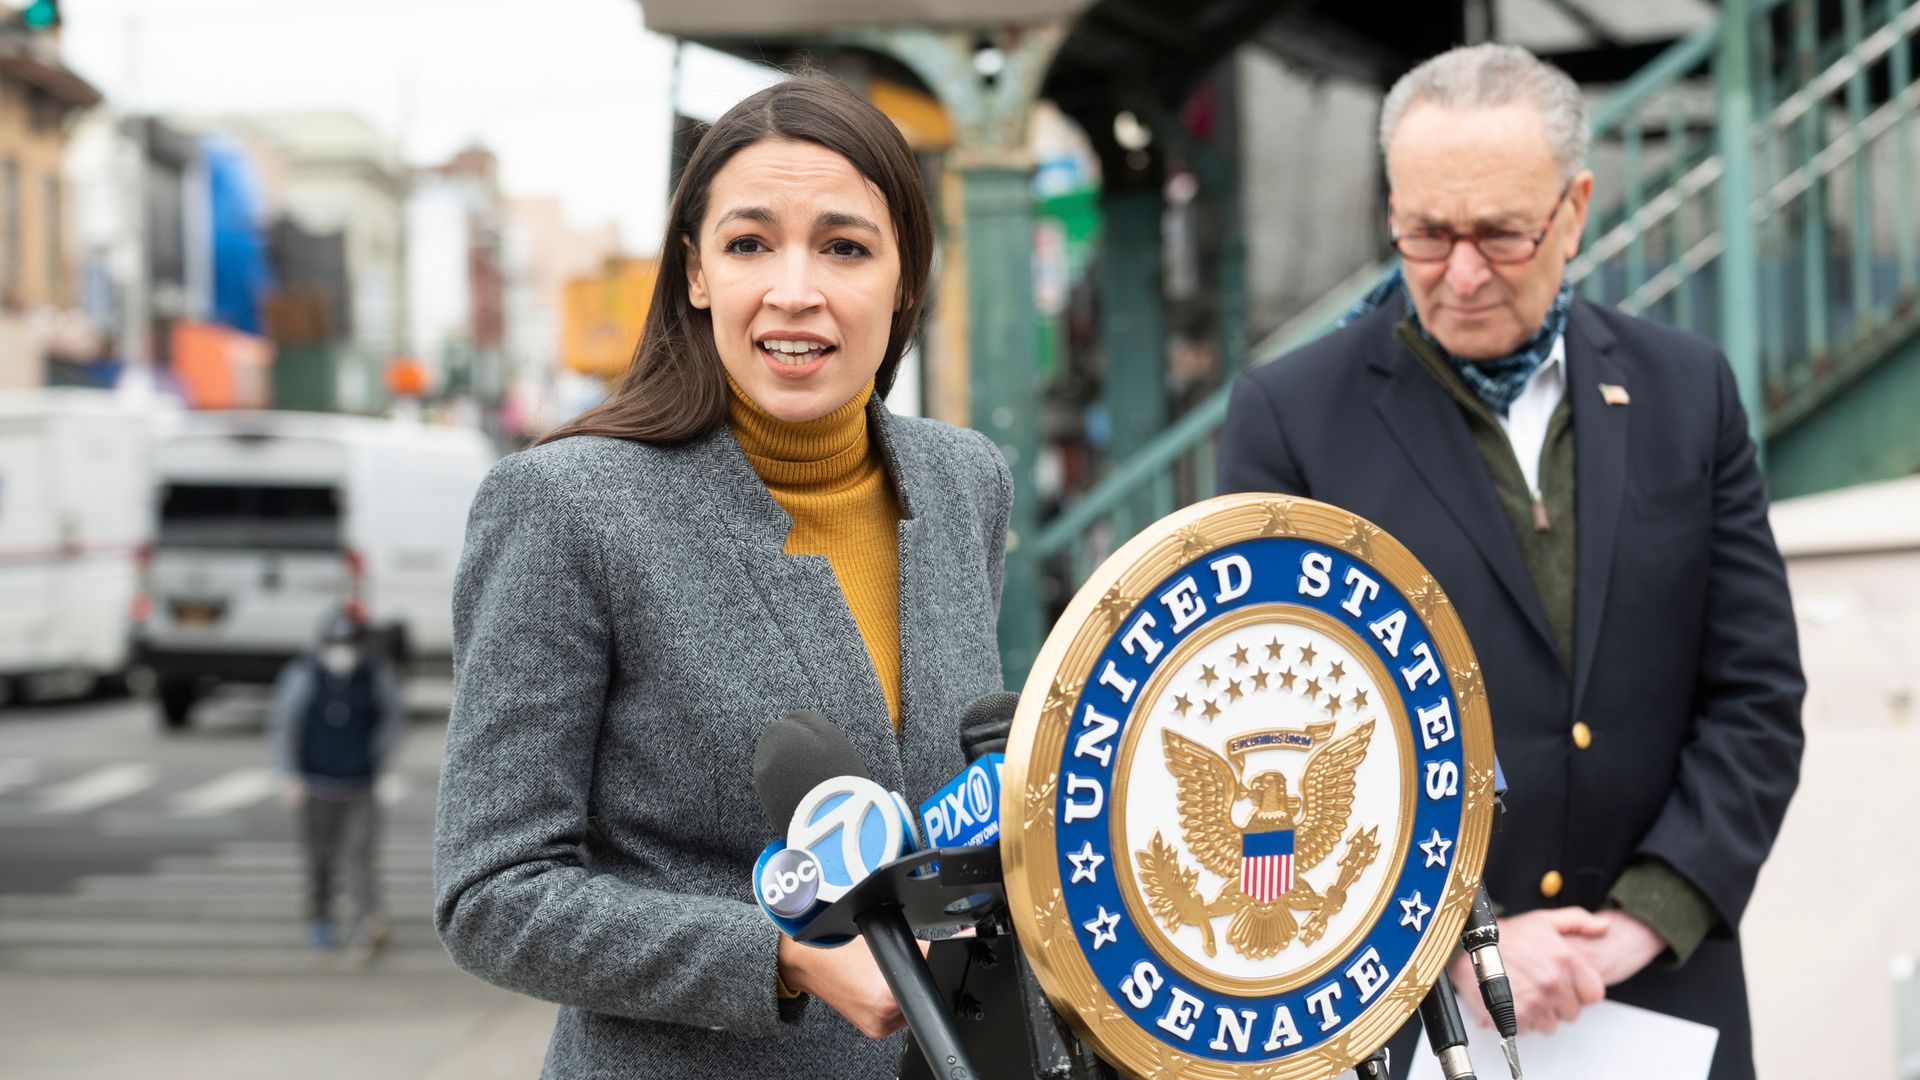 Democratic Congresswoman from New York Alexandria Ocasio-Cortez speaks as Senate Minority Leader Chuck Schumer listens during a press conference in Queens on April 14, 2020 in New York